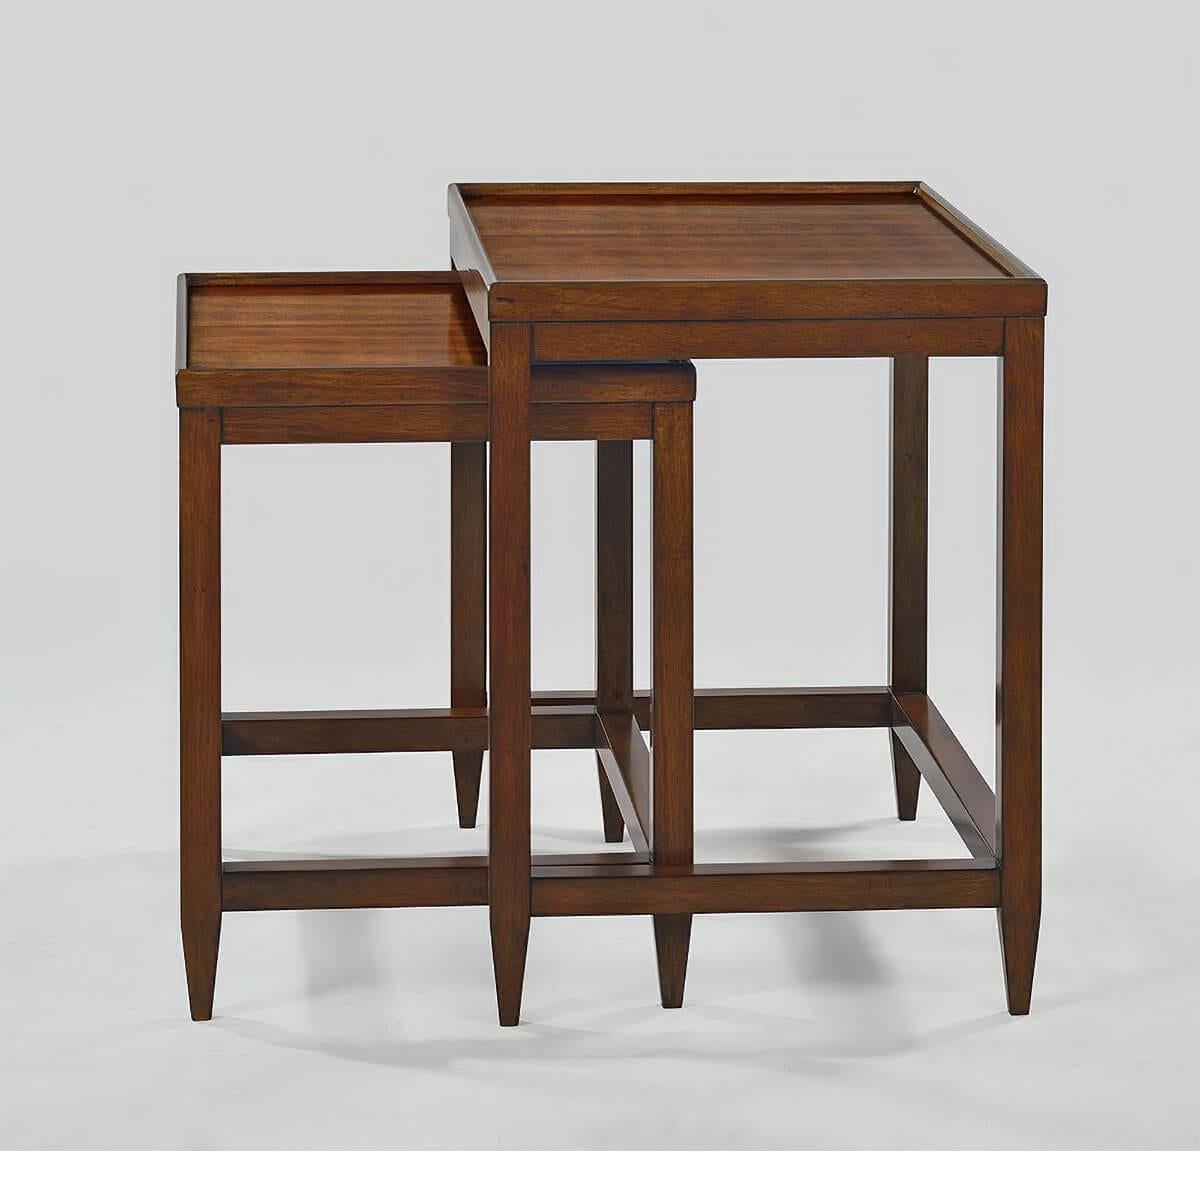 A Classic nest of tables, two rectangular nested side tables with a “rustic” warm brown walnut finish with subtle visual distressing and hand-rubbed finish.

Dimensions: 24